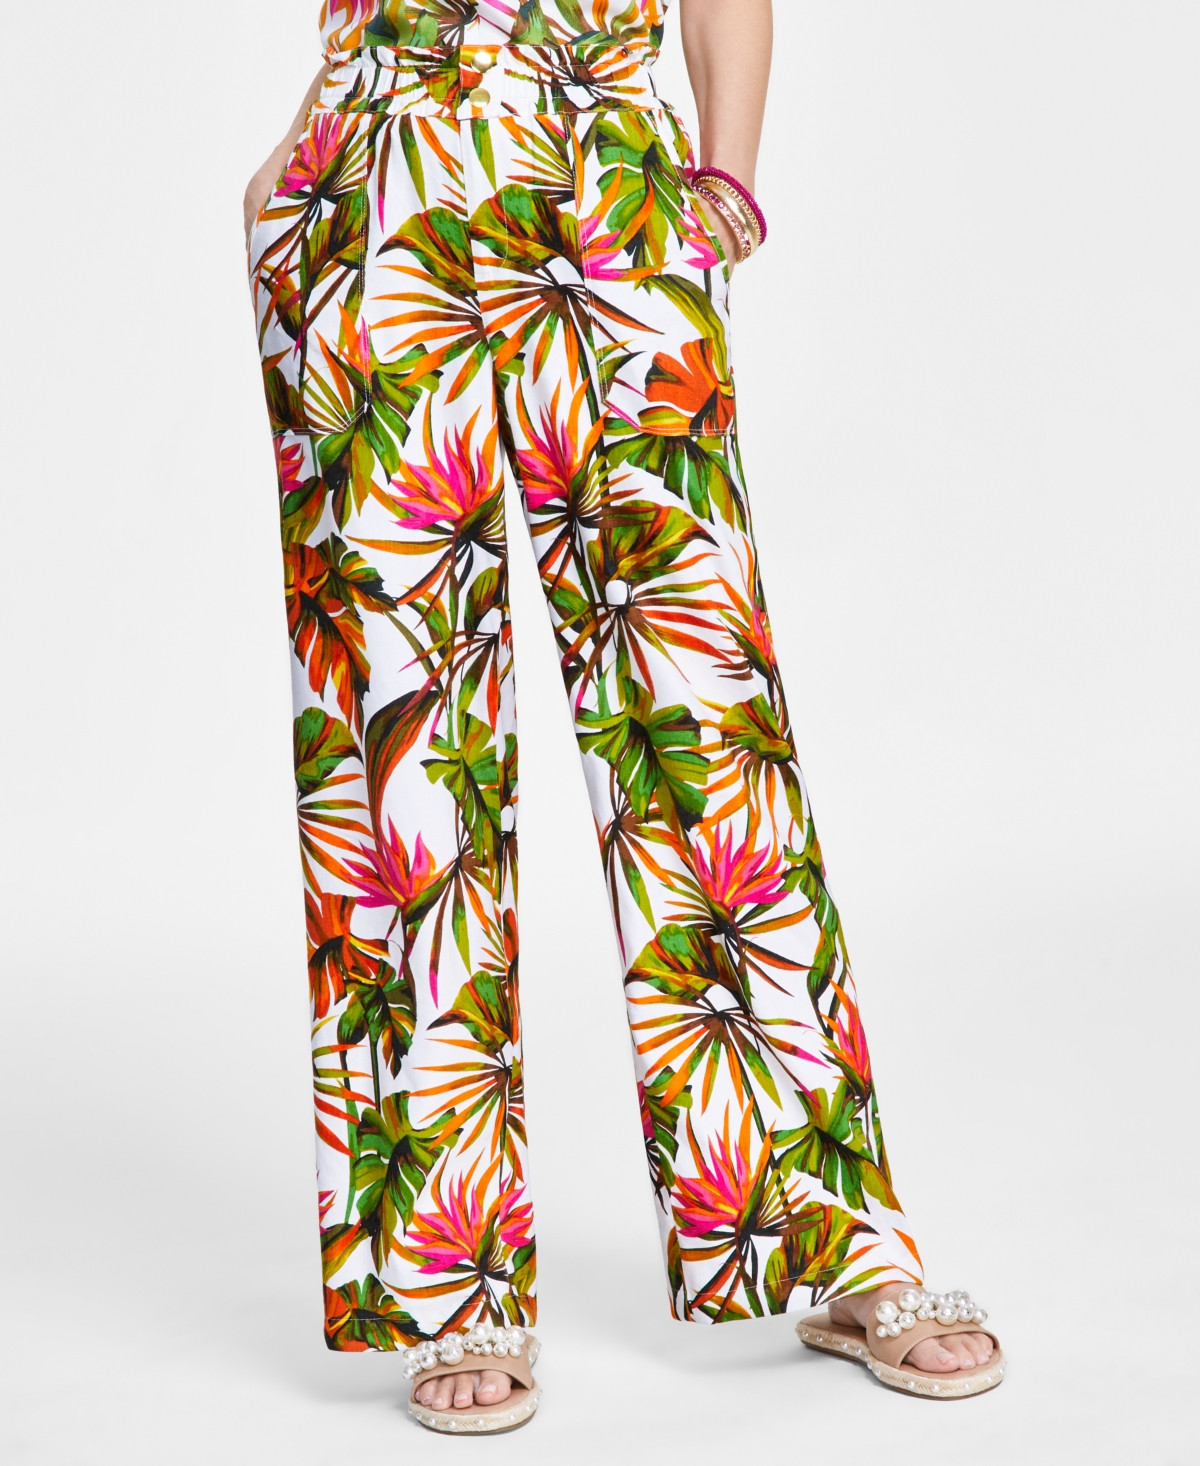 Petite Printed Linen Wide-Leg Pants, Created for Macy's - Tropical Garden